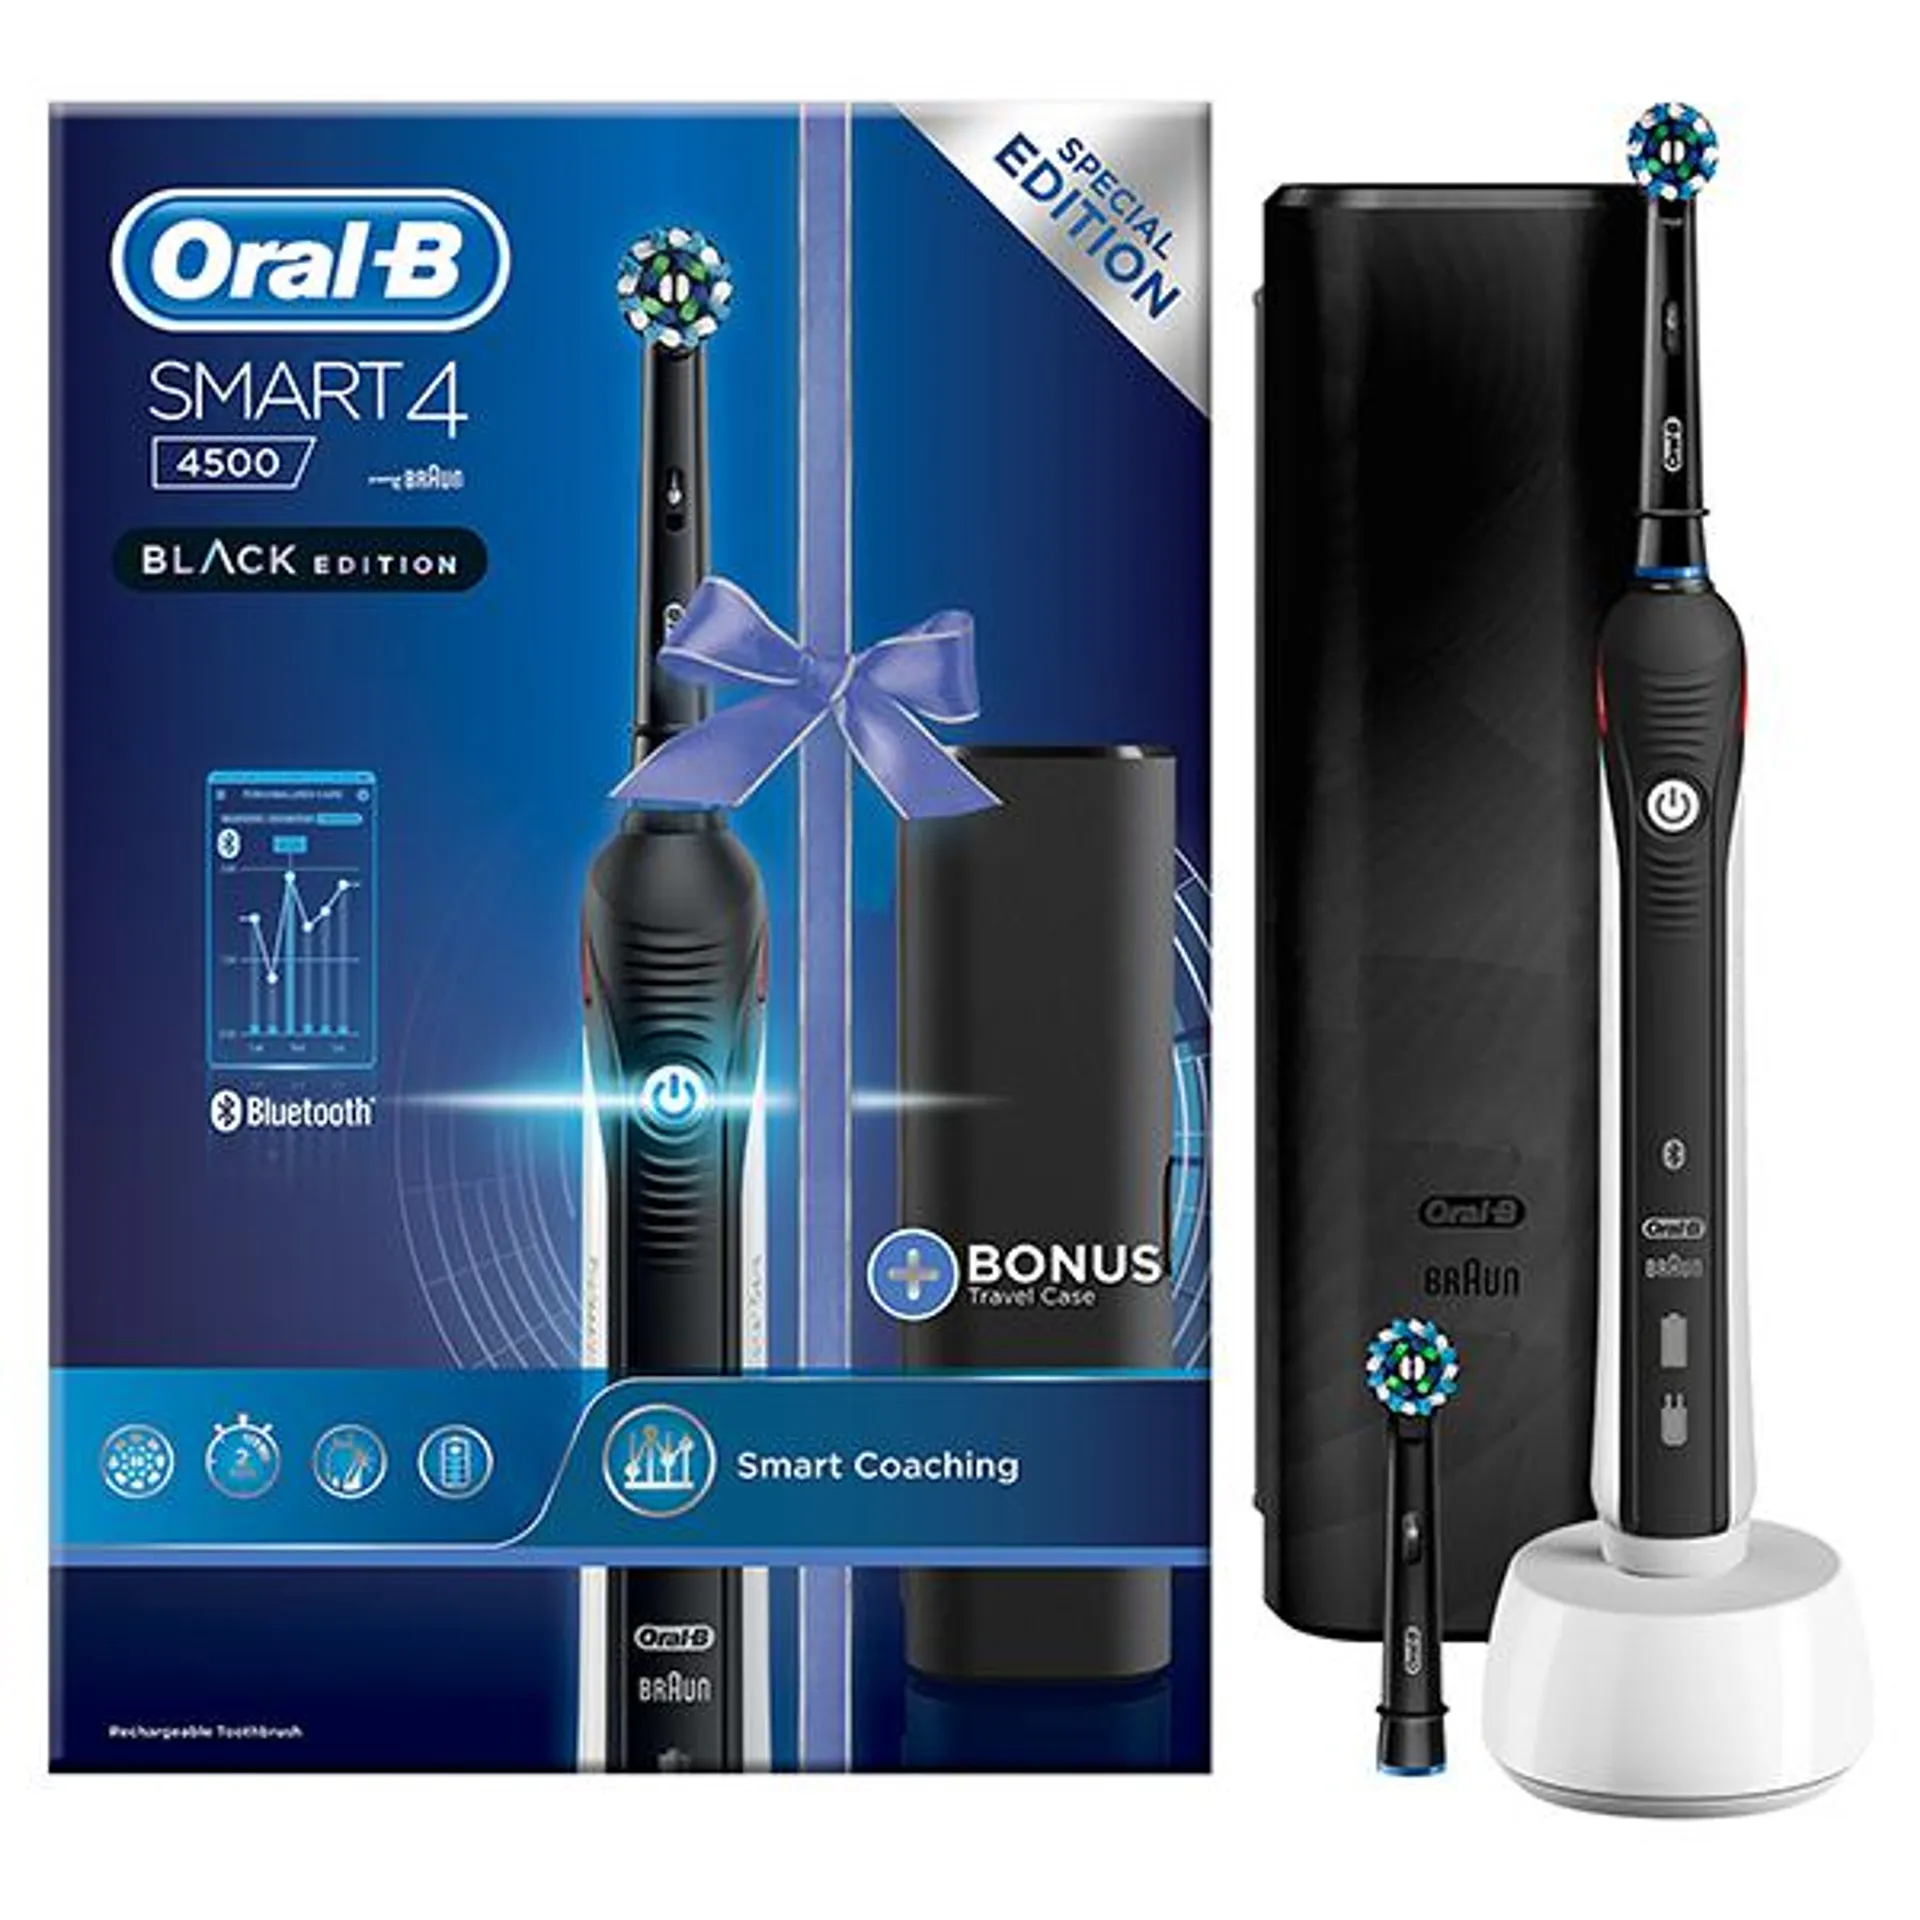 Oral-B Smart 4500 CrossAction Black Electric Toothbrush with Travel Case